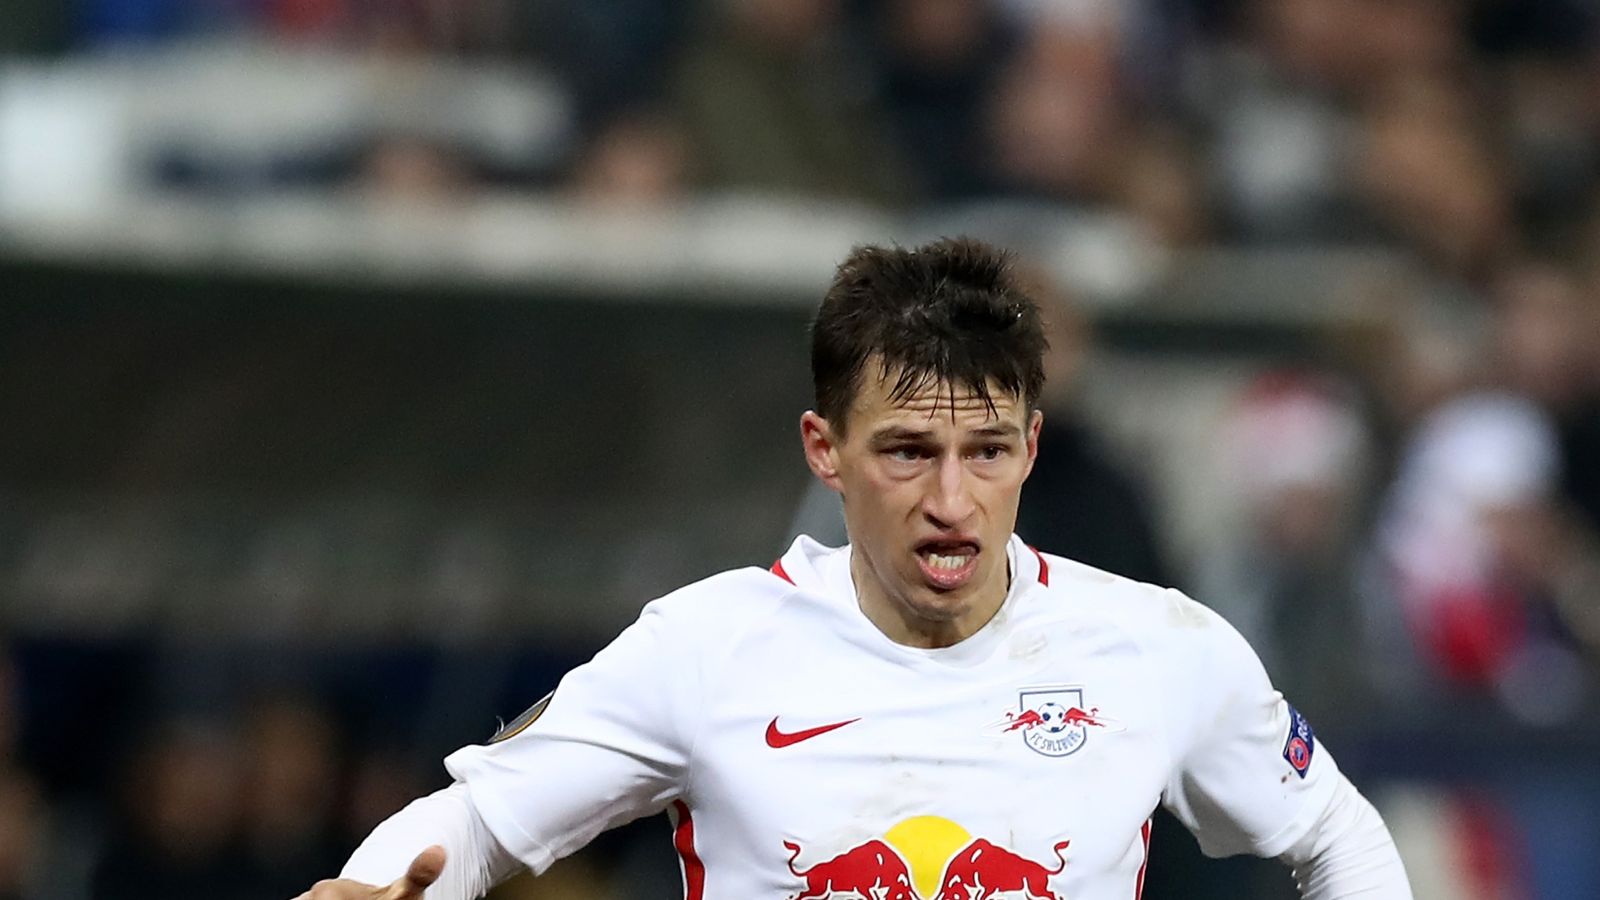 RB Leipzig and Red Bull Salzburg to compete in Champions League